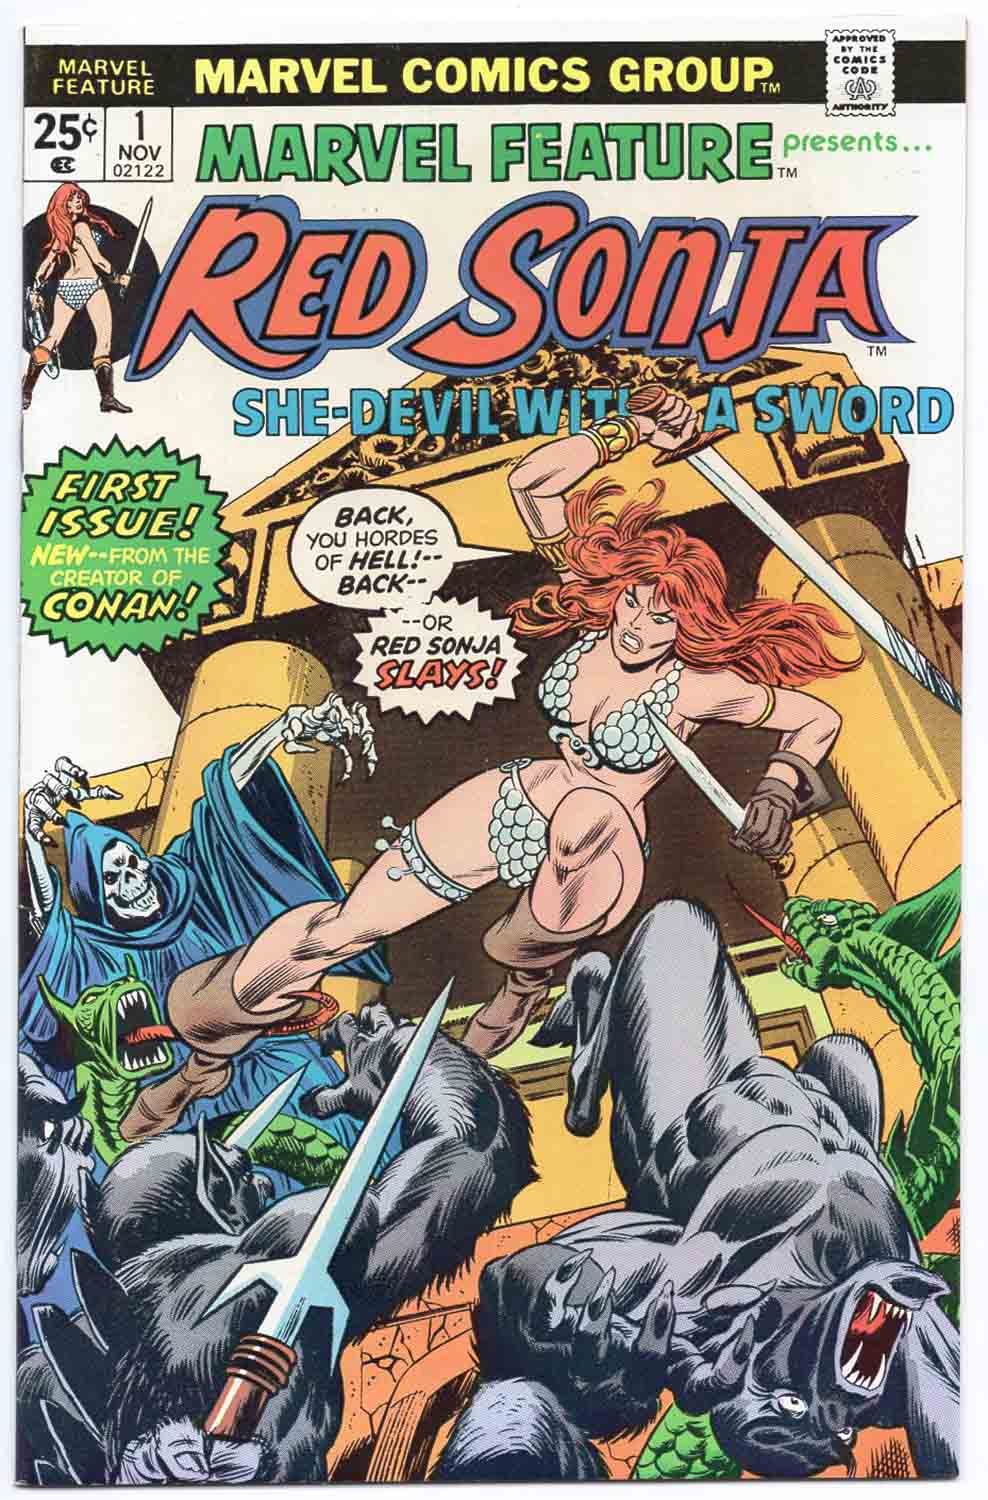 Marvel Feature #1 Red Sonja